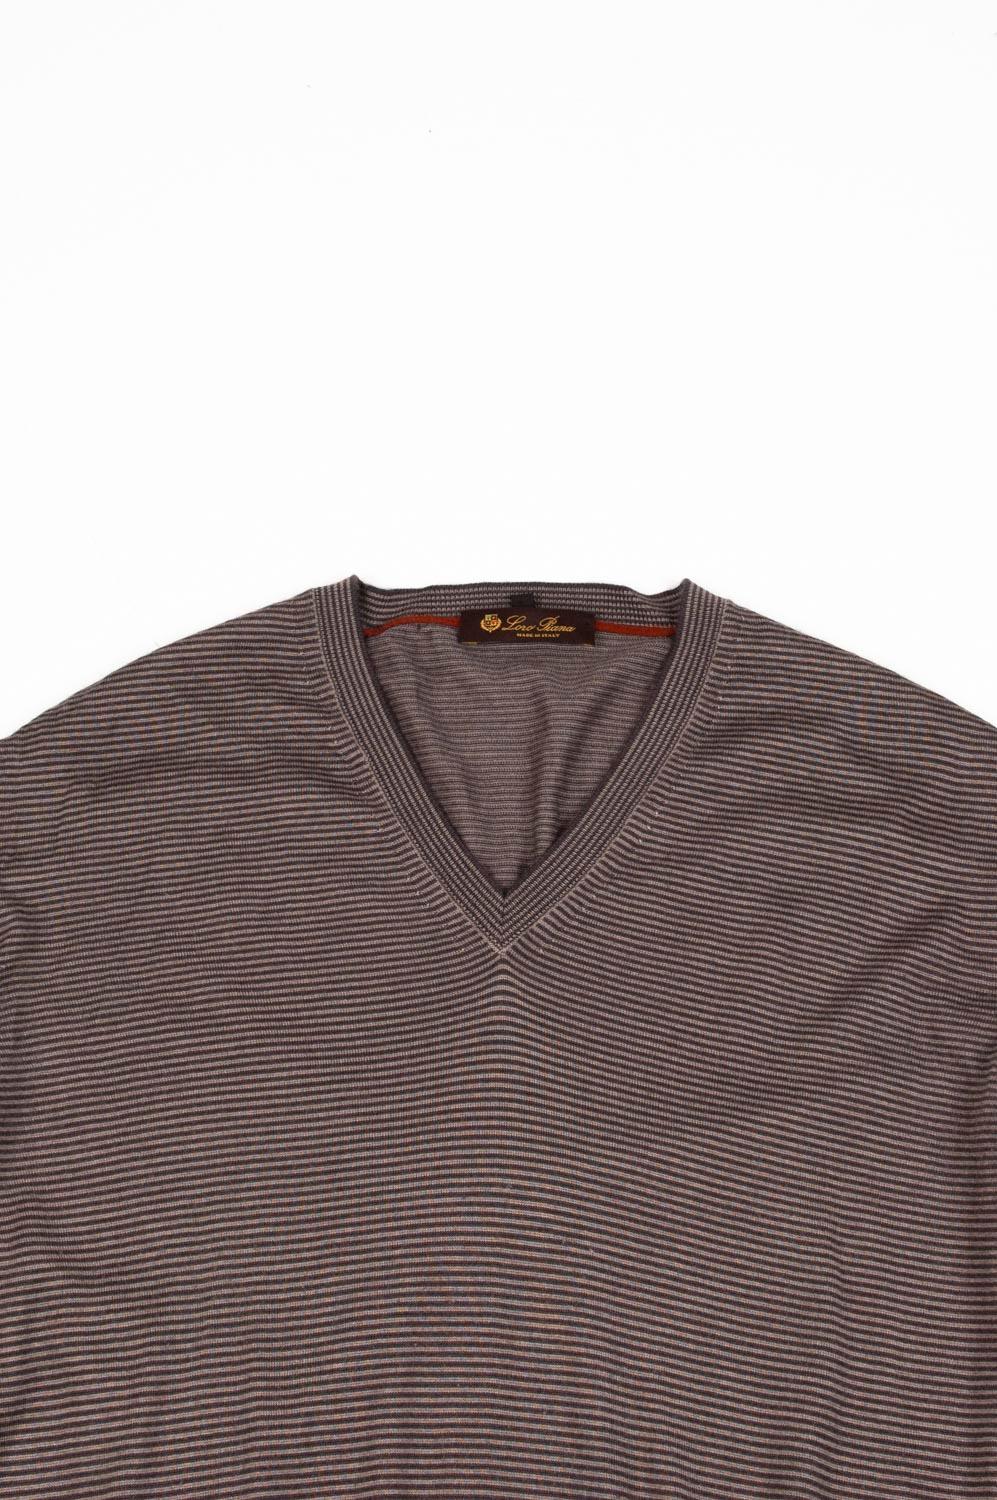 100% genuine Loro Piana Cashmere Silk Striped V-Neck Sweater, S183
Color: Sand/Grey
(An actual color may a bit vary due to individual computer screen interpretation)
Material: 70% cashmere, 30% silk
Tag size: 52, Large
This sweater is great quality